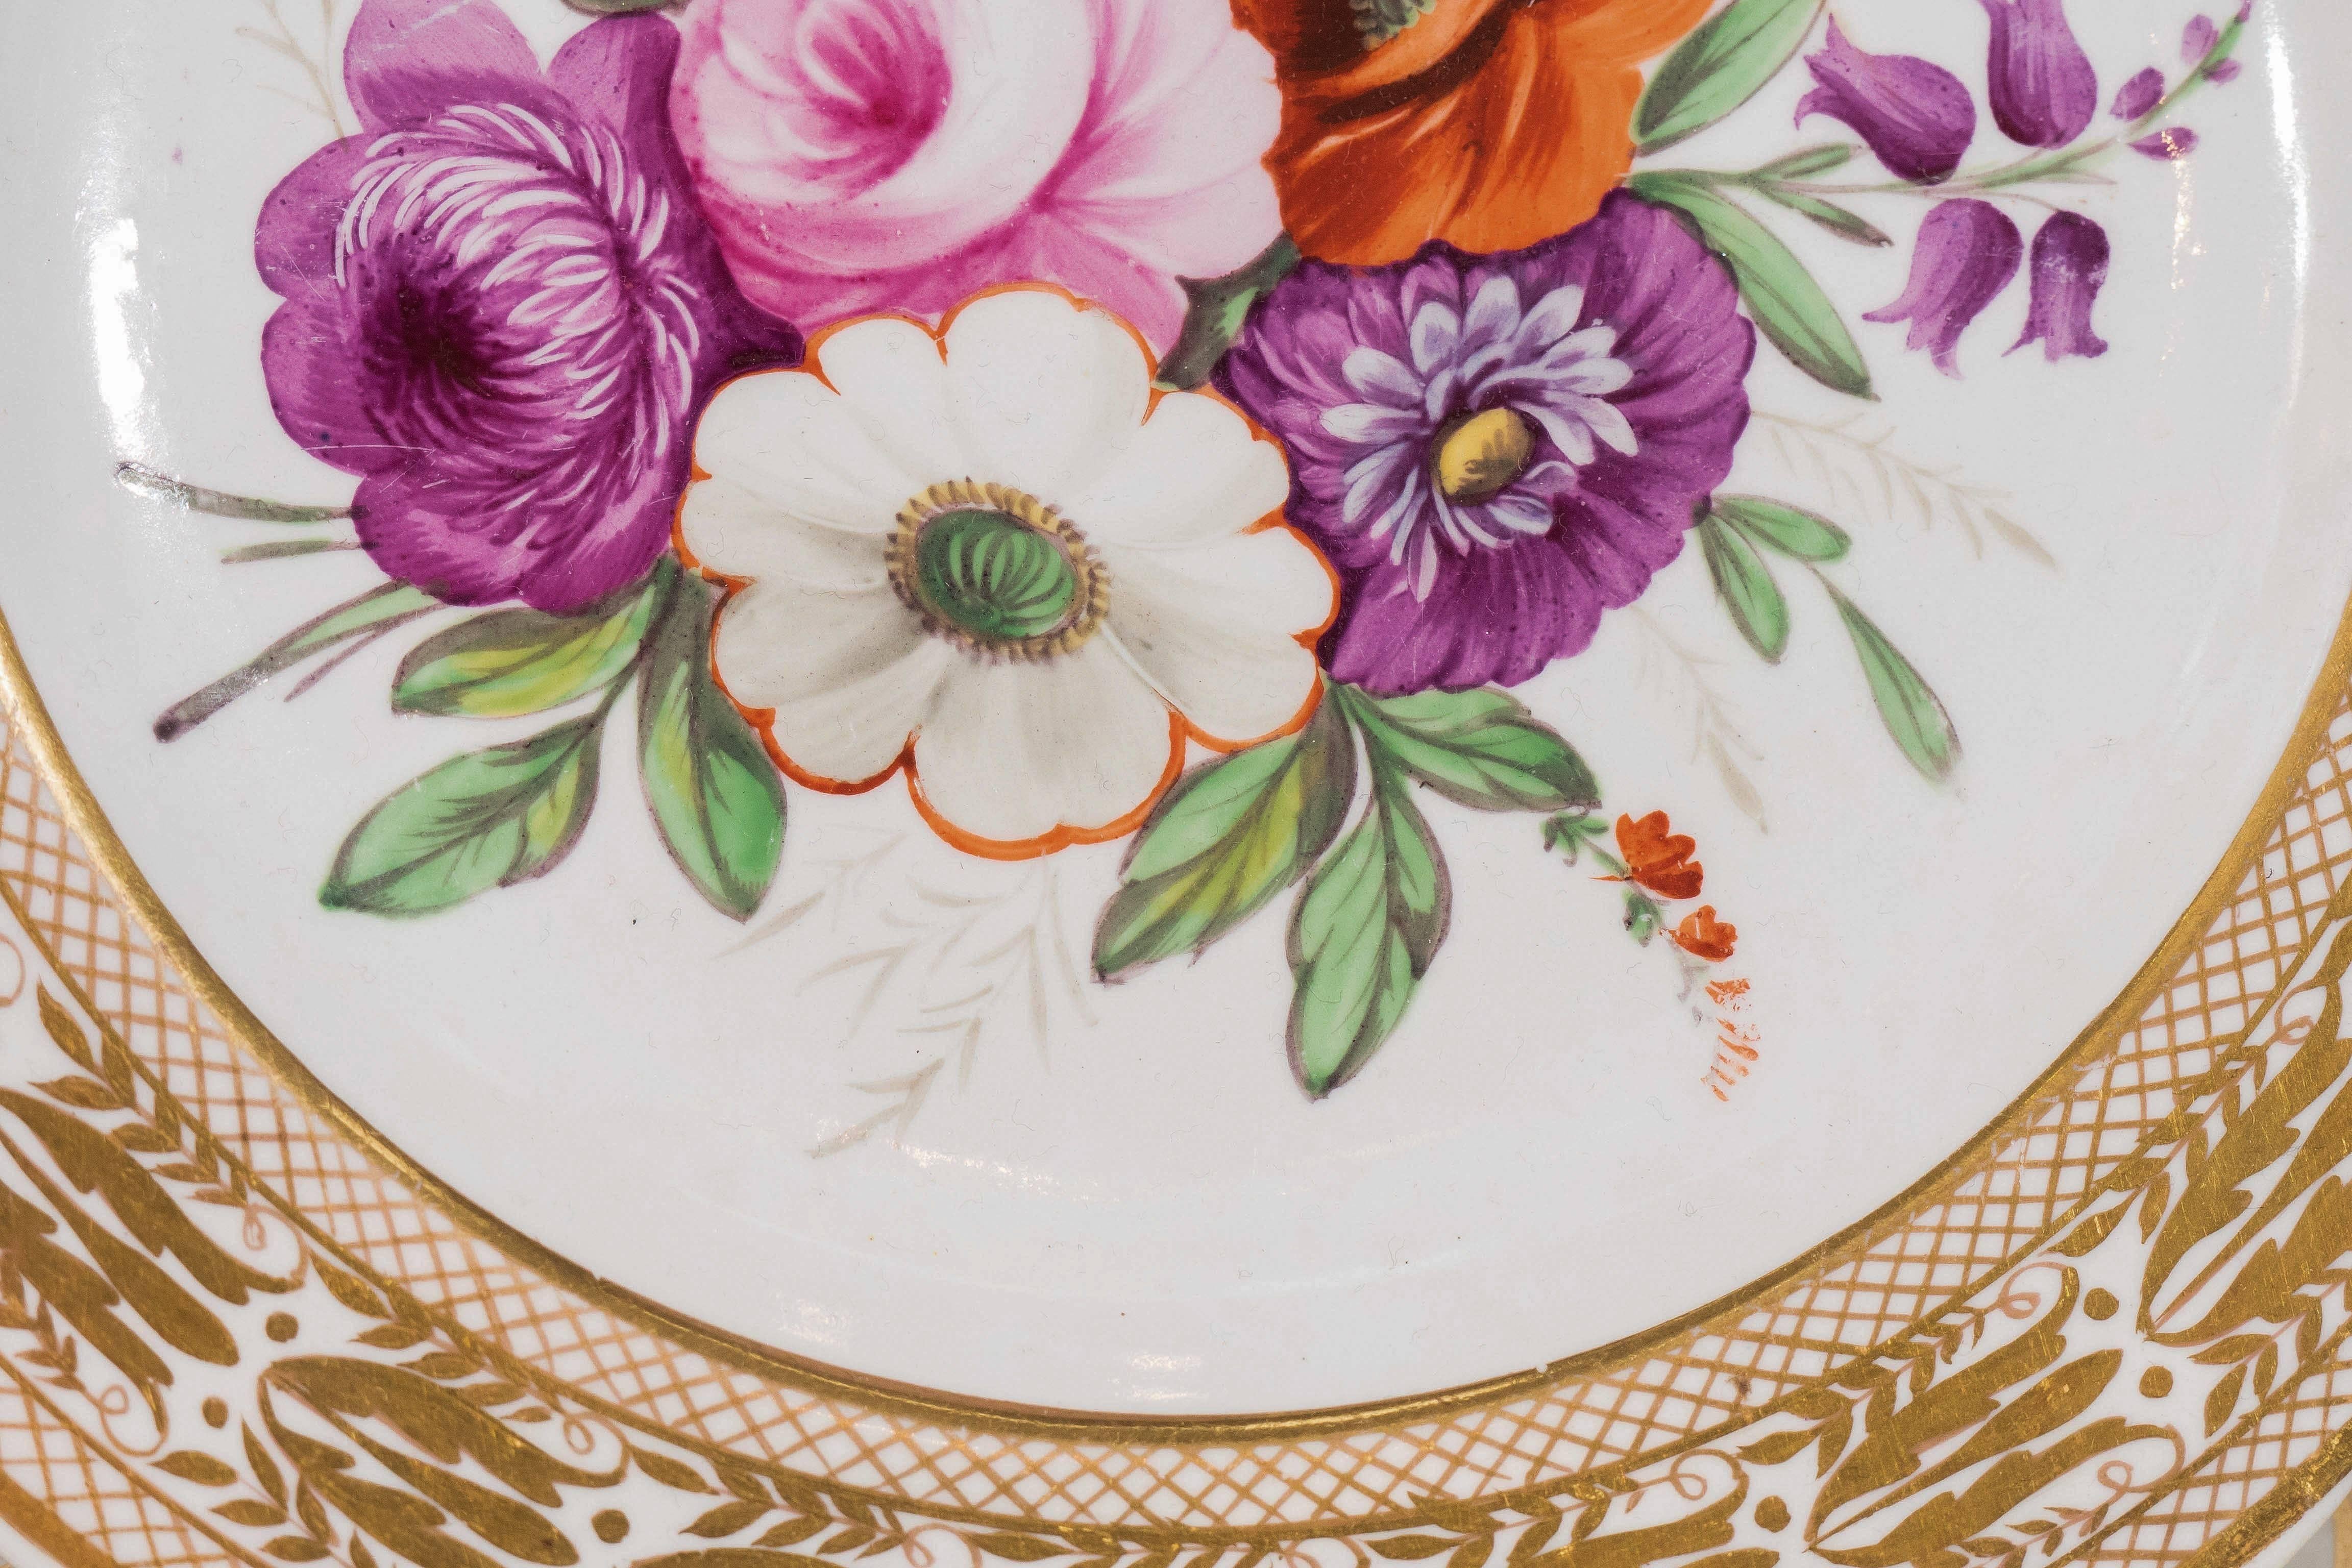 Hand-Painted Antique Porcelain Dishes Painted Flowers